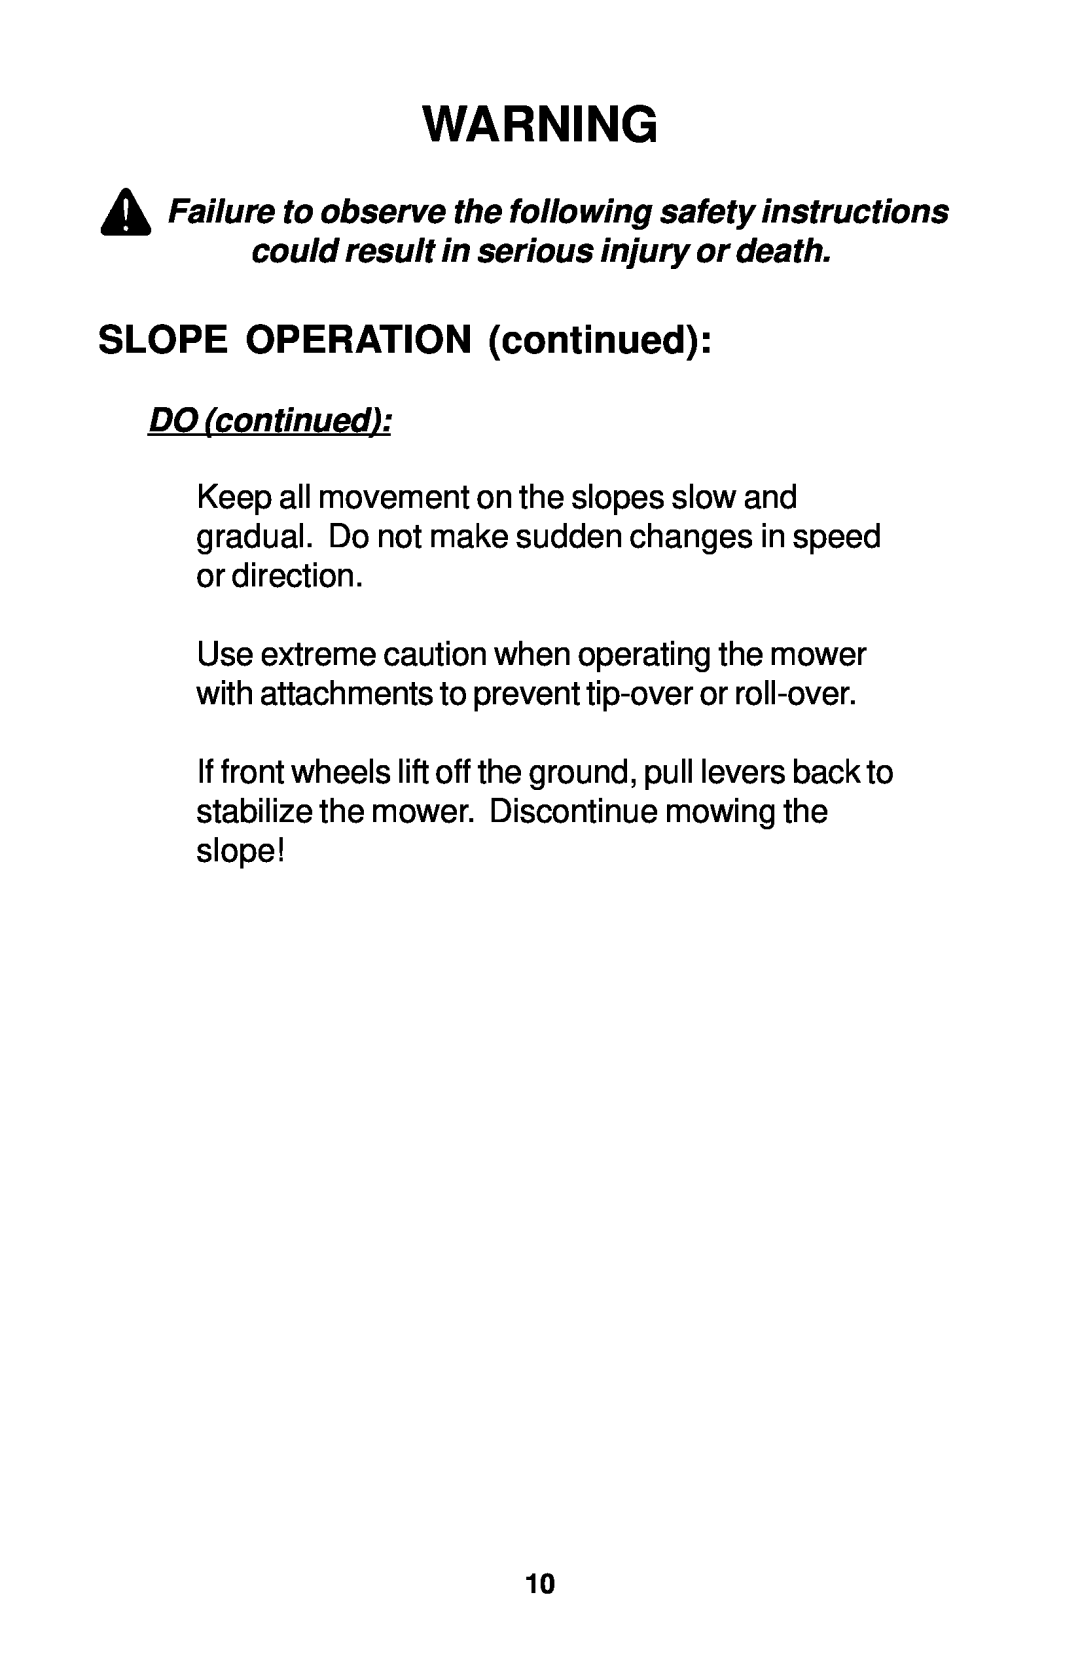 Dixon 18134-1004 manual SLOPE OPERATION continued, DO continued 